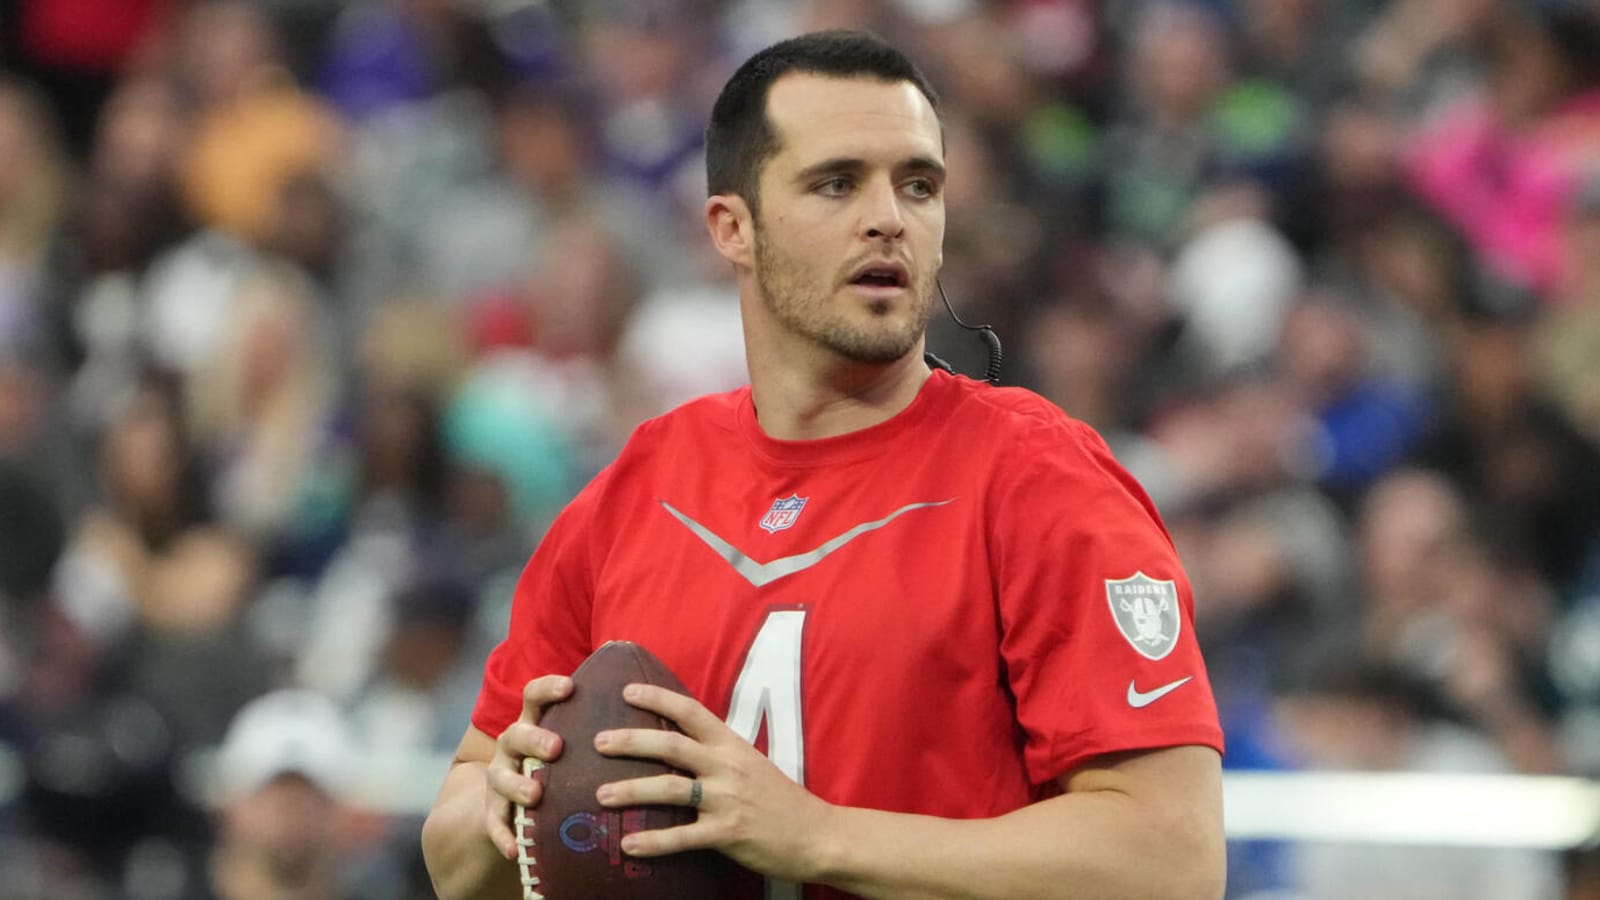 Derek Carr had 'very positive' visit with Jets